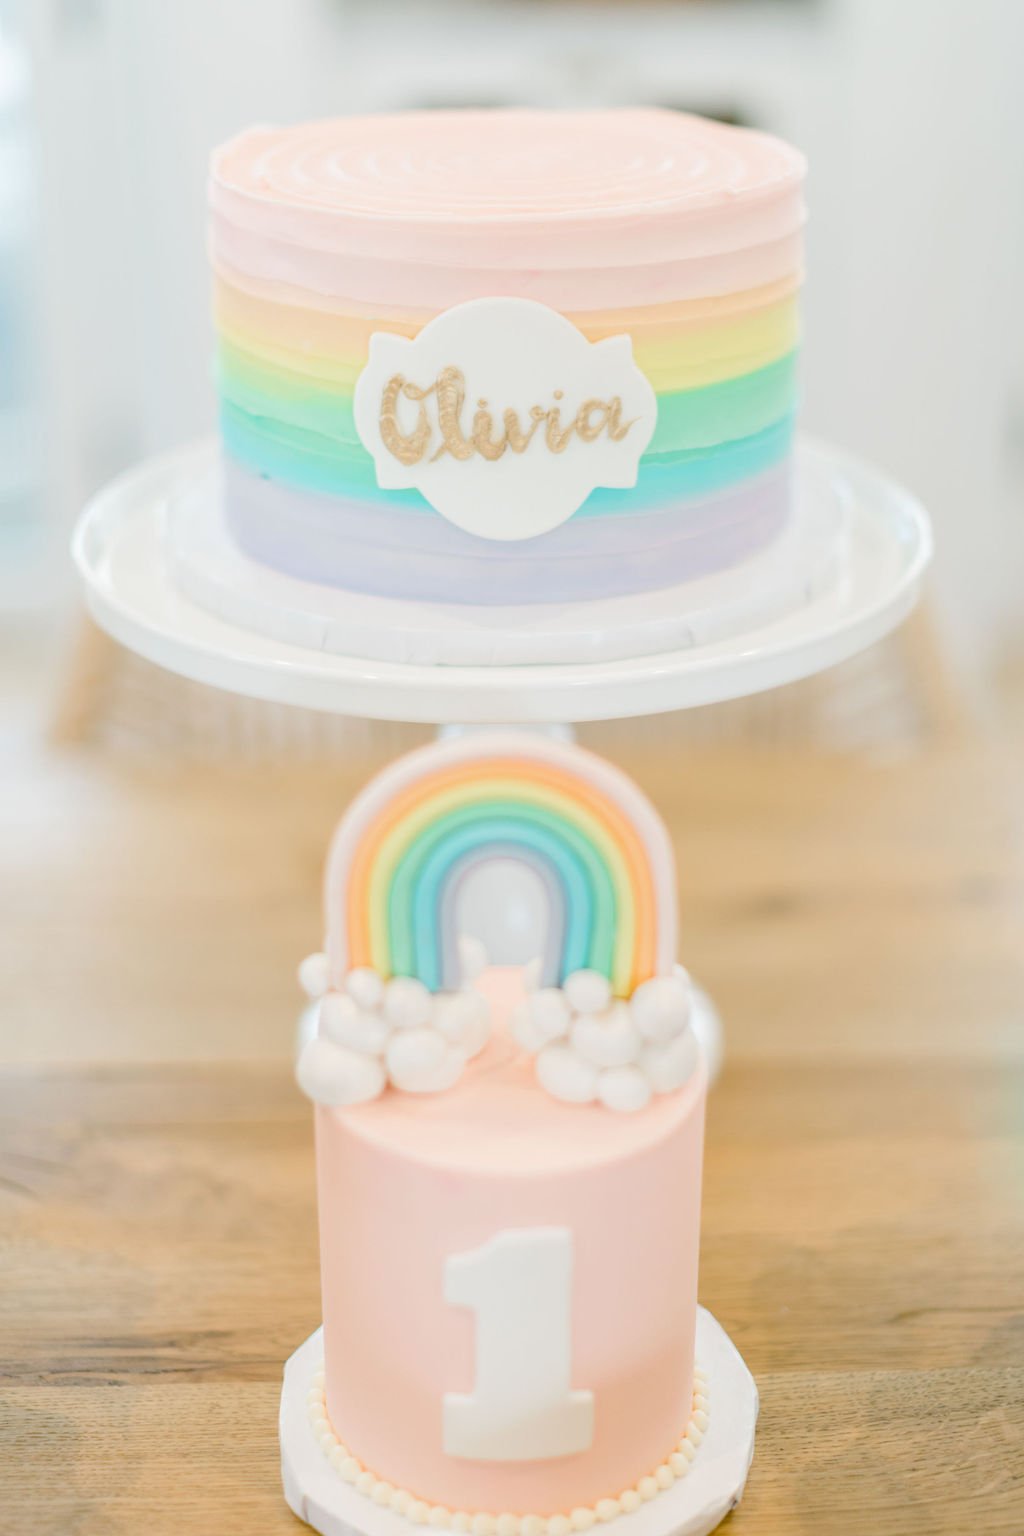 Rainbow First Birthday Cake and smash cake ideas  - get details and more Rainbow Party inspiration at www.minteventdesign.com!